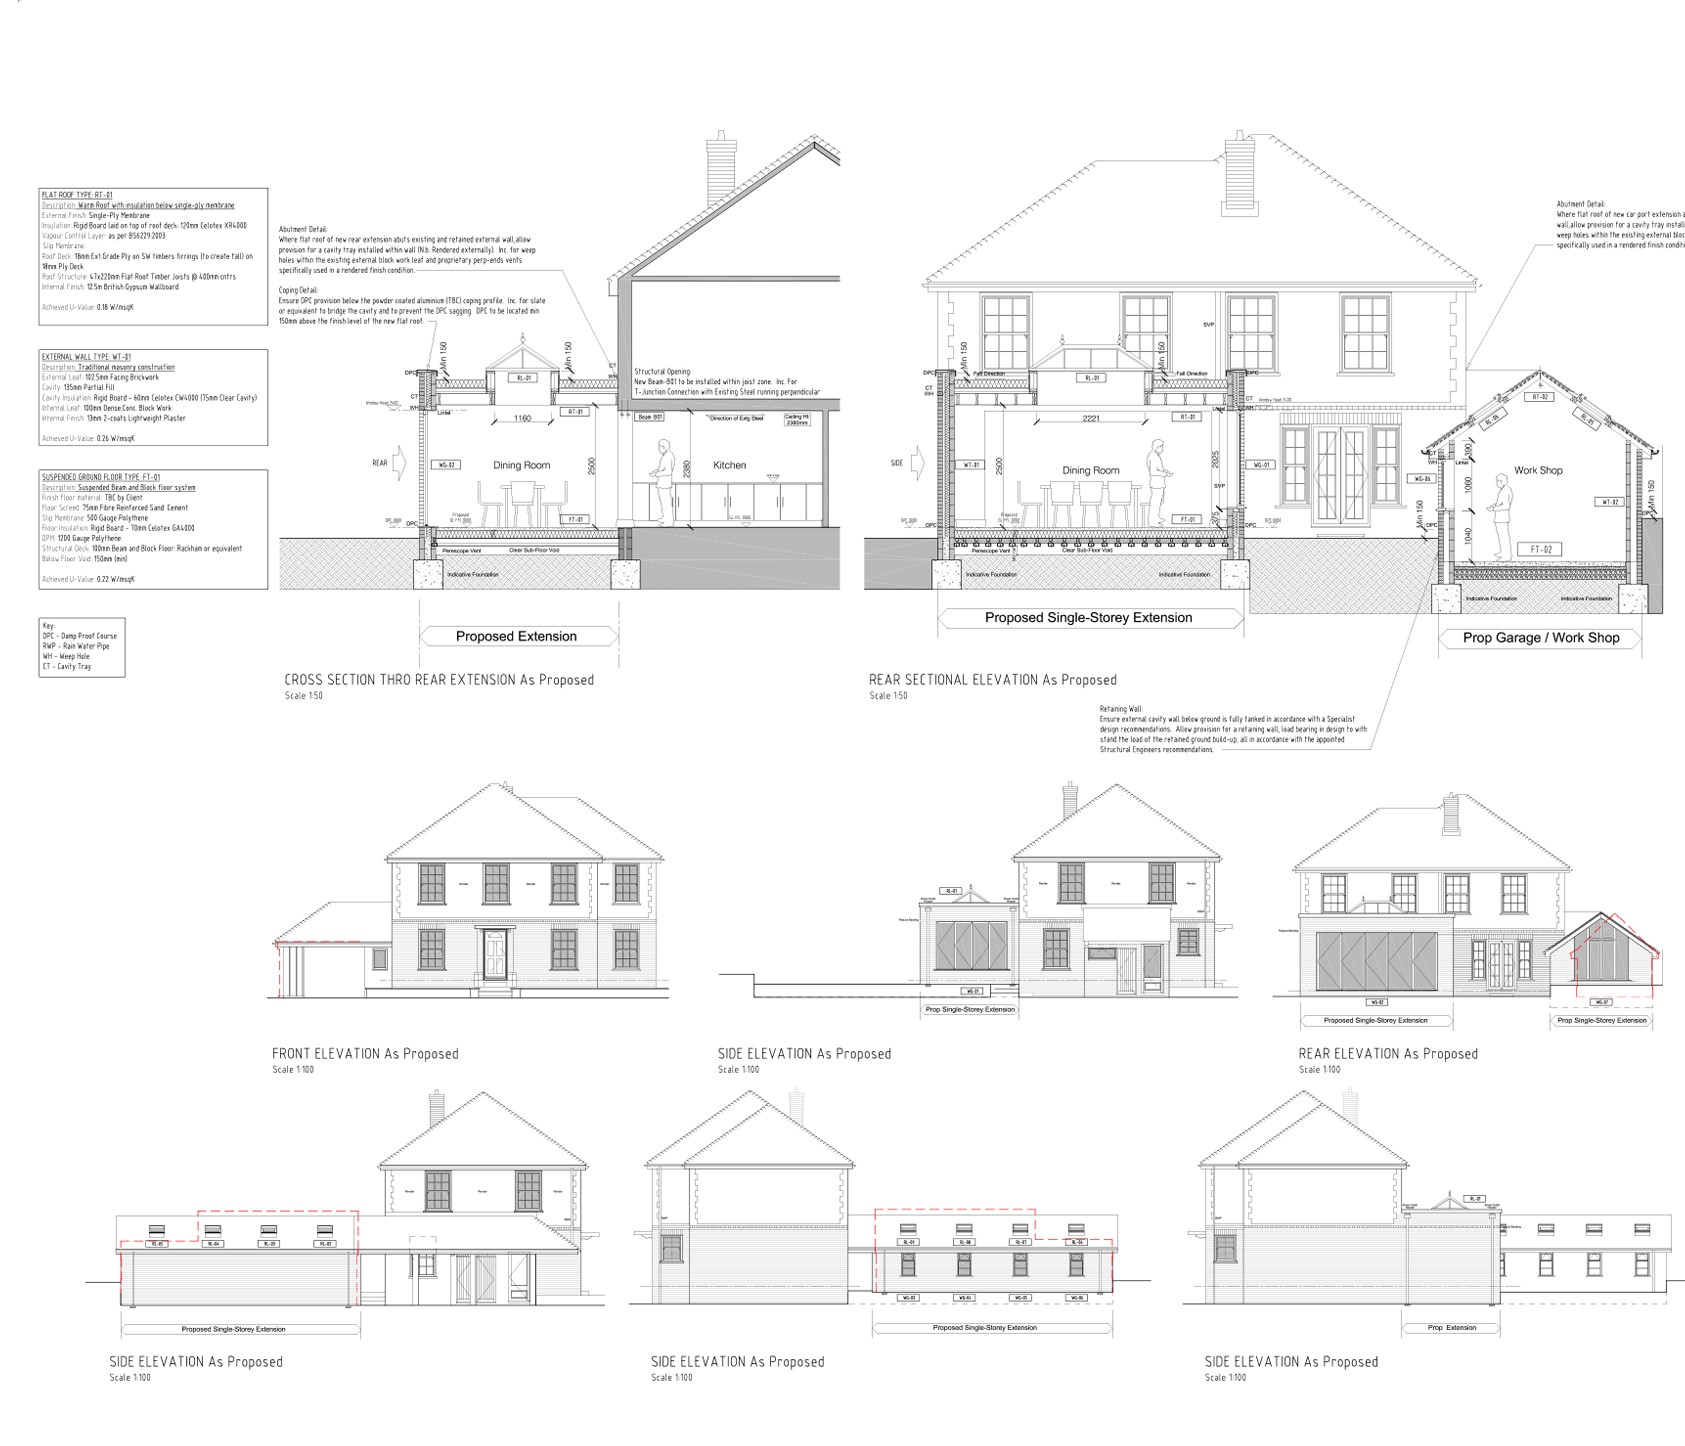 Submitting and obtaining planning can be a complicated and daunting process.&nbsp;
 Holtham+Newman Architects have the experience in submitting applications that consistently gain full written approval from the Council planning authority.
We will identify planning policy relevant to your proposal to reduce the risk of a planning refusal
We will advise you on the various external Consultants you may need to appoint to satisfy the validation process.  We have developed strong working relationships with specialists including Planning Consultants, Ecologists and Arboriculturists who we can engage on your behalf.
We will prepare and submit the full application on your behalf including the requisite forms and liaise with the appointed Case Officer throughout the period at which your application is being determined.  